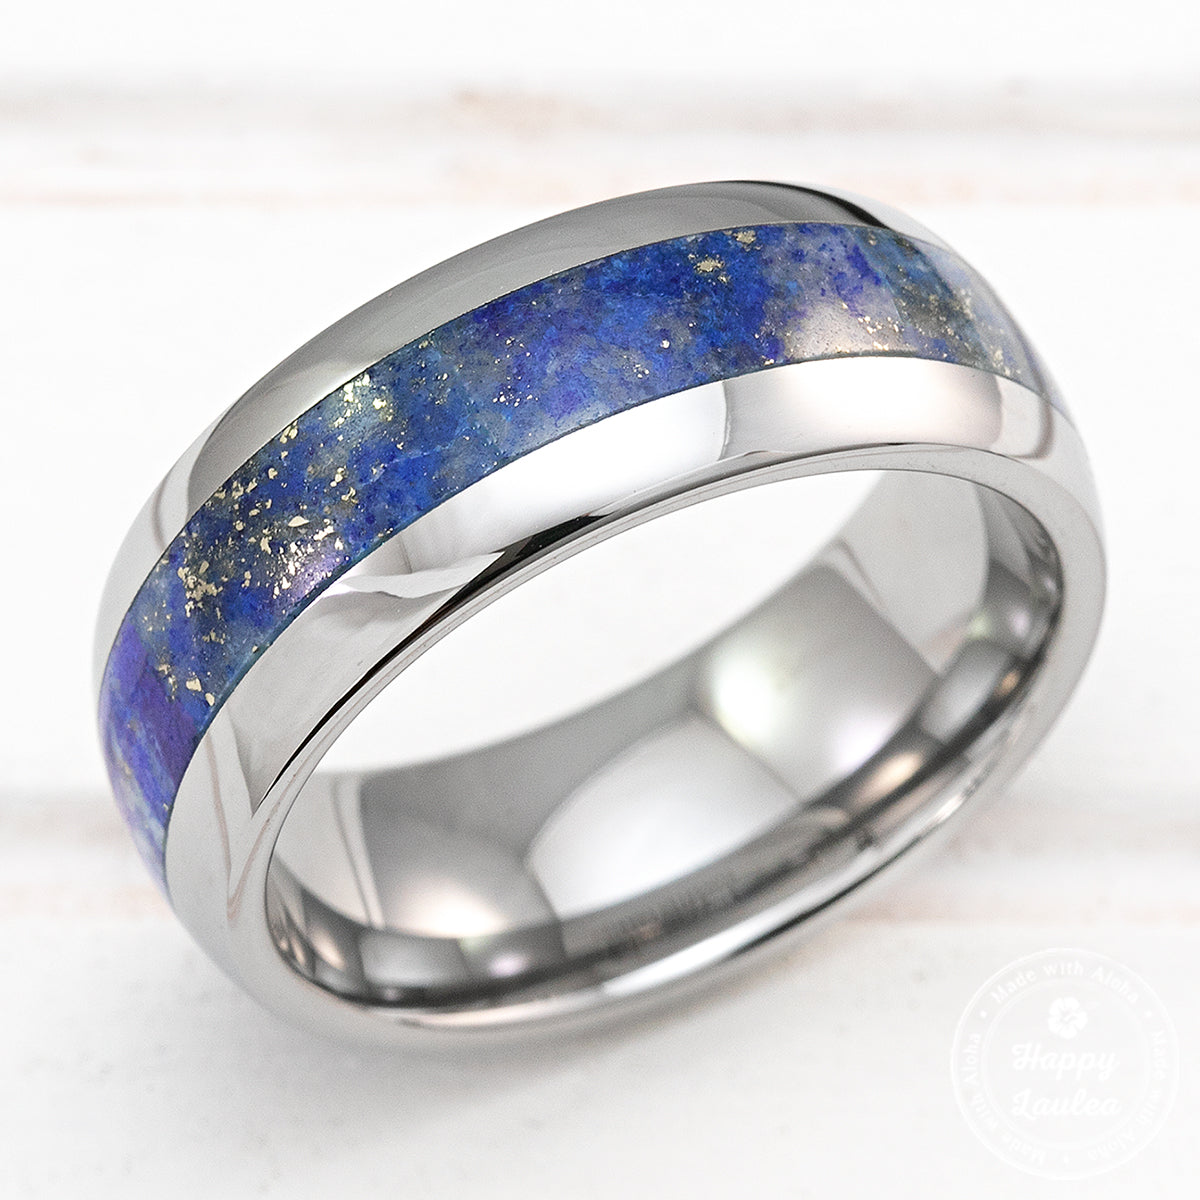 Tungsten Carbide Dome Shape Ring with Lapis Lazuli Inlay - 8mm, Comfort Fitment